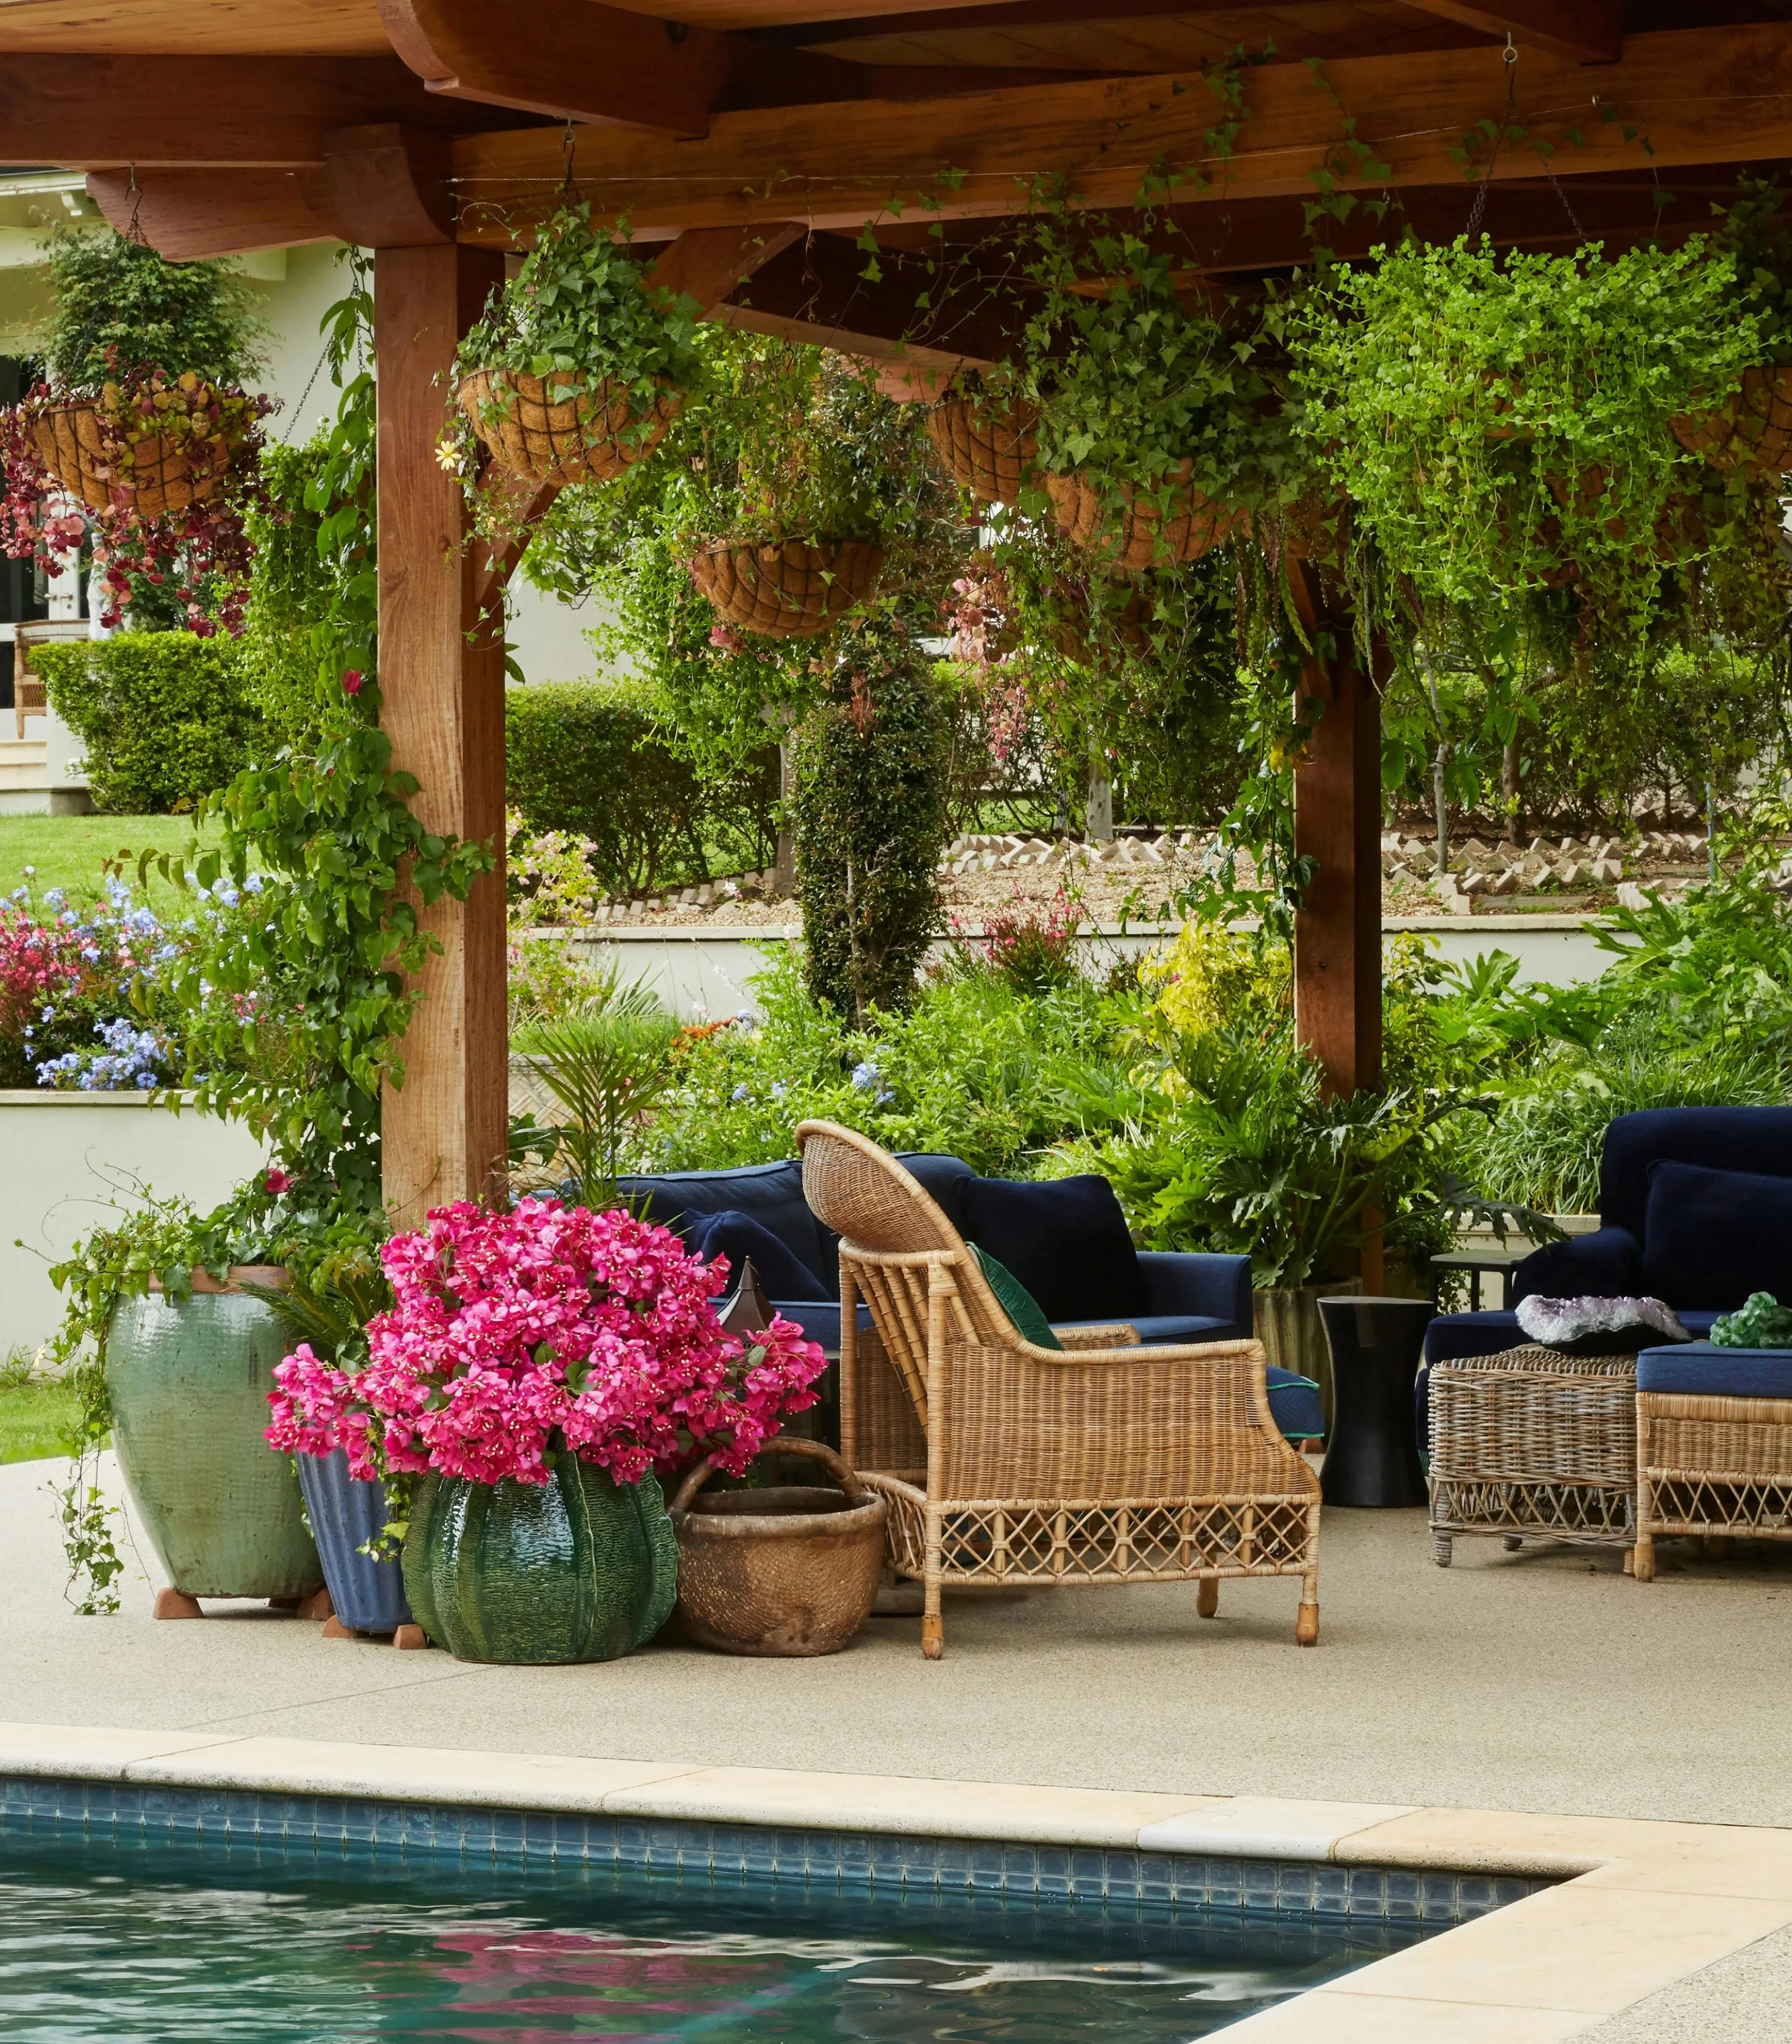 An outdoor entertainment area with rattan furniture with flowers in  planters in the foreground.